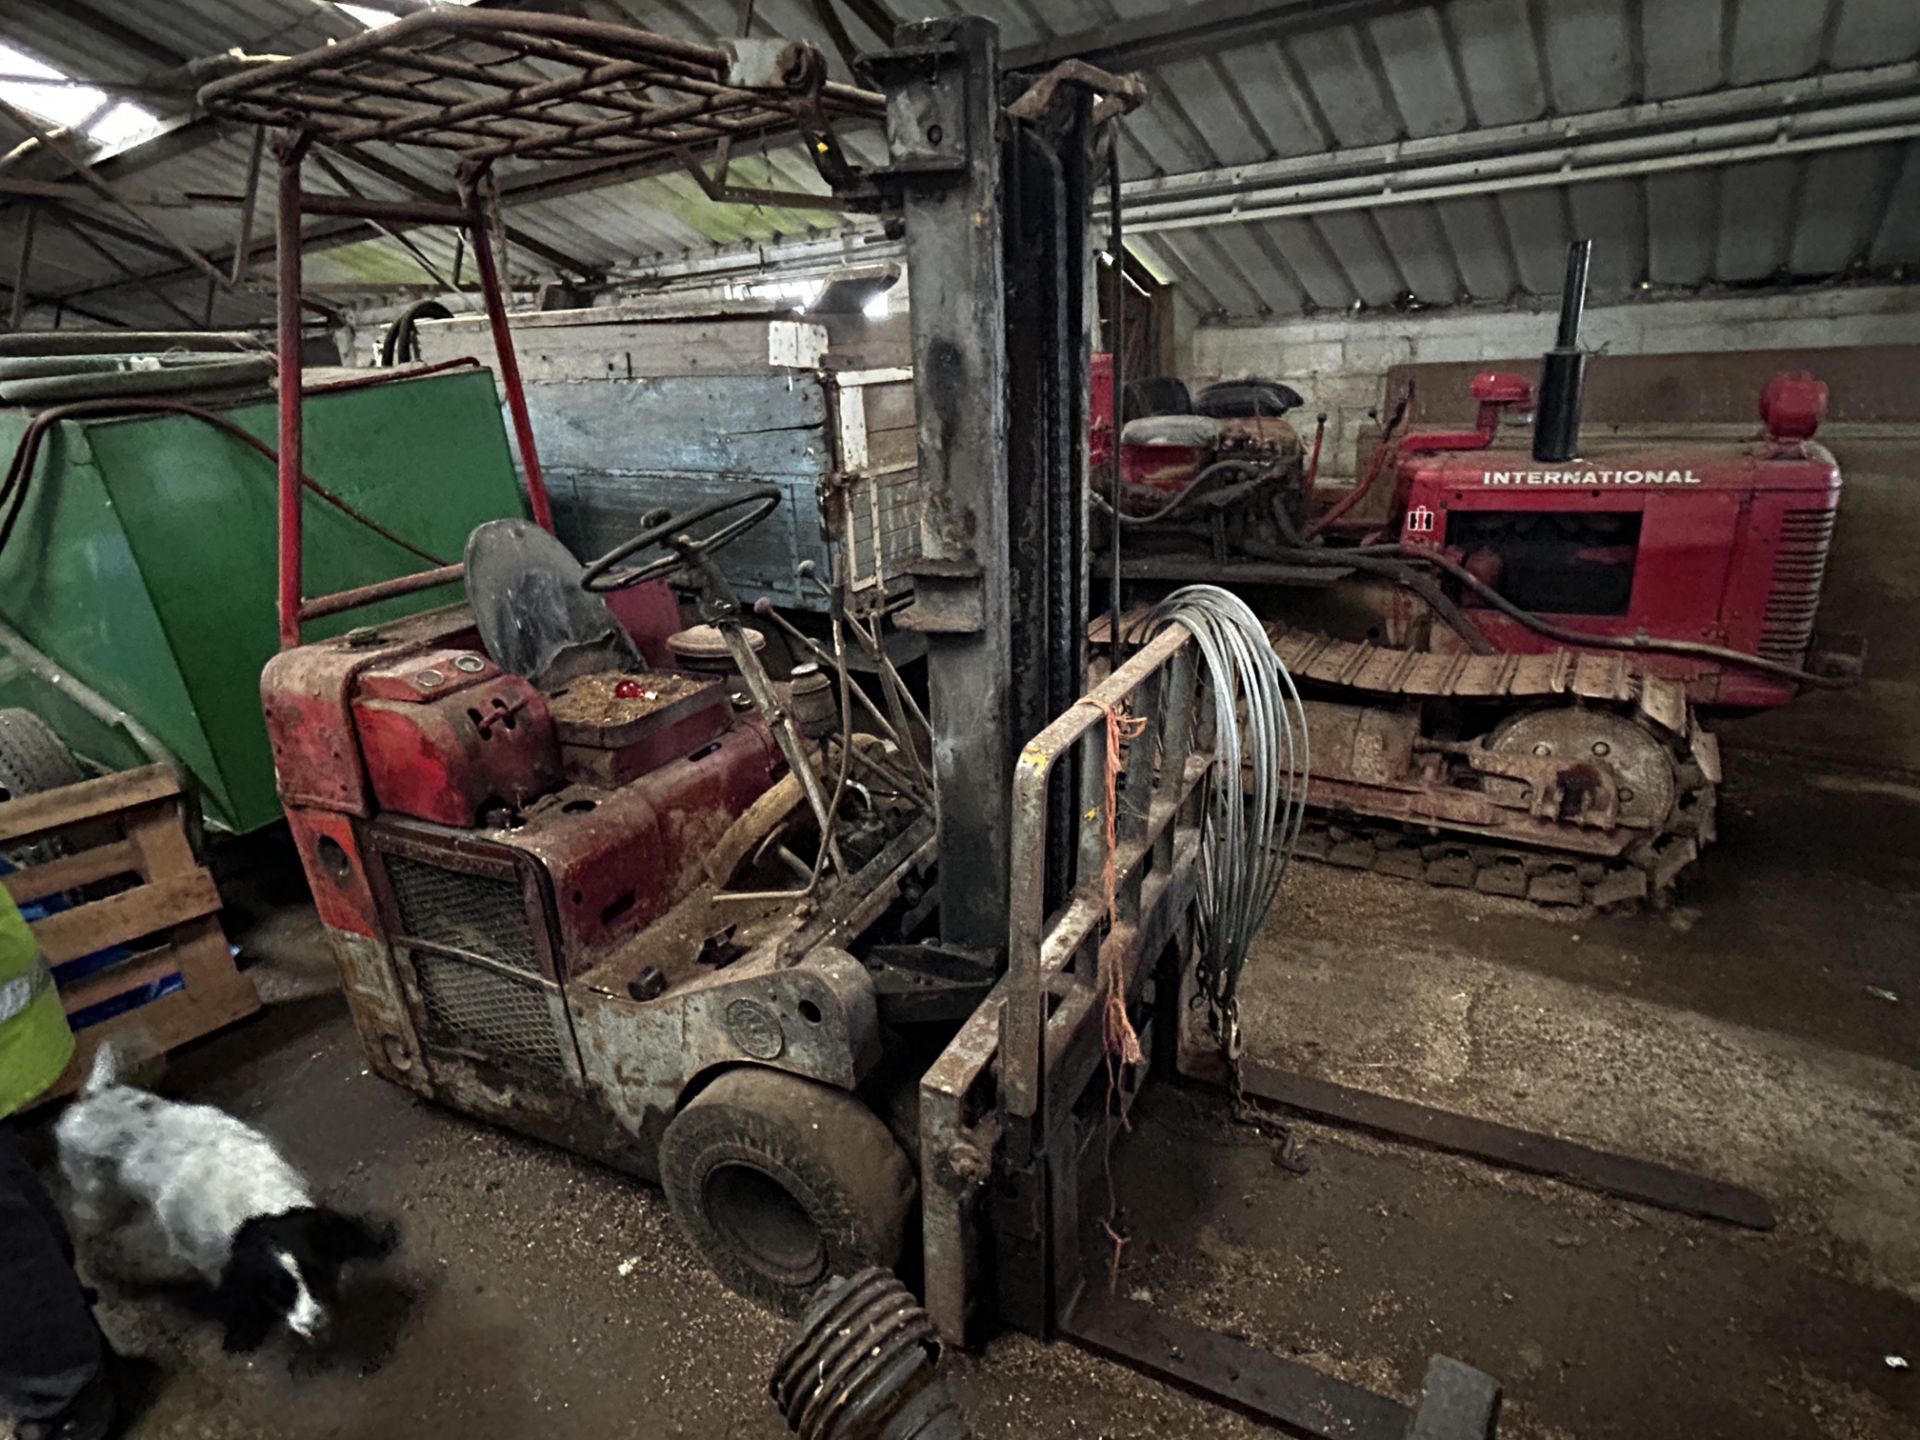 Coventry Climax Godiva diesel yard forklift. With three cylinder diesel engine. No battery.